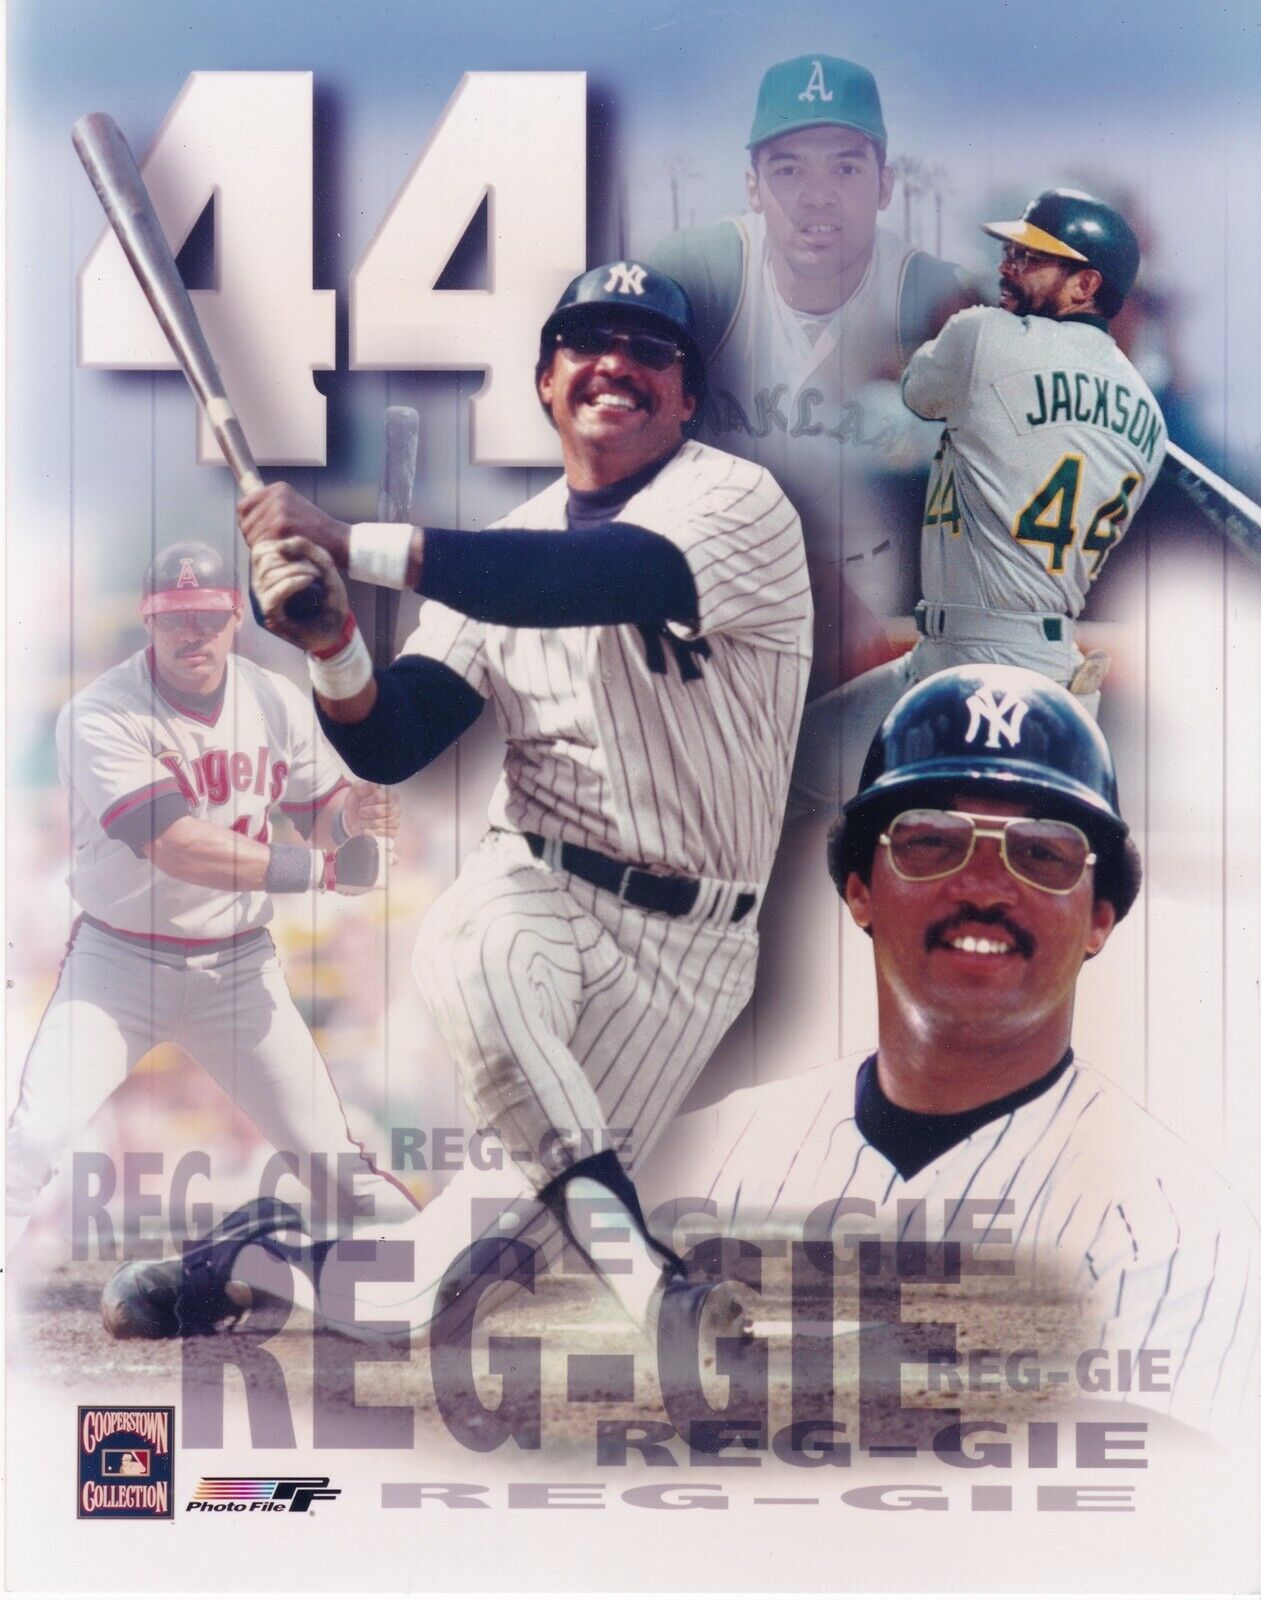 REGGIE JACKSON NEW YORK YANKEES Photo Poster paintingFILE LICENSED ACTION 8x10 Photo Poster painting